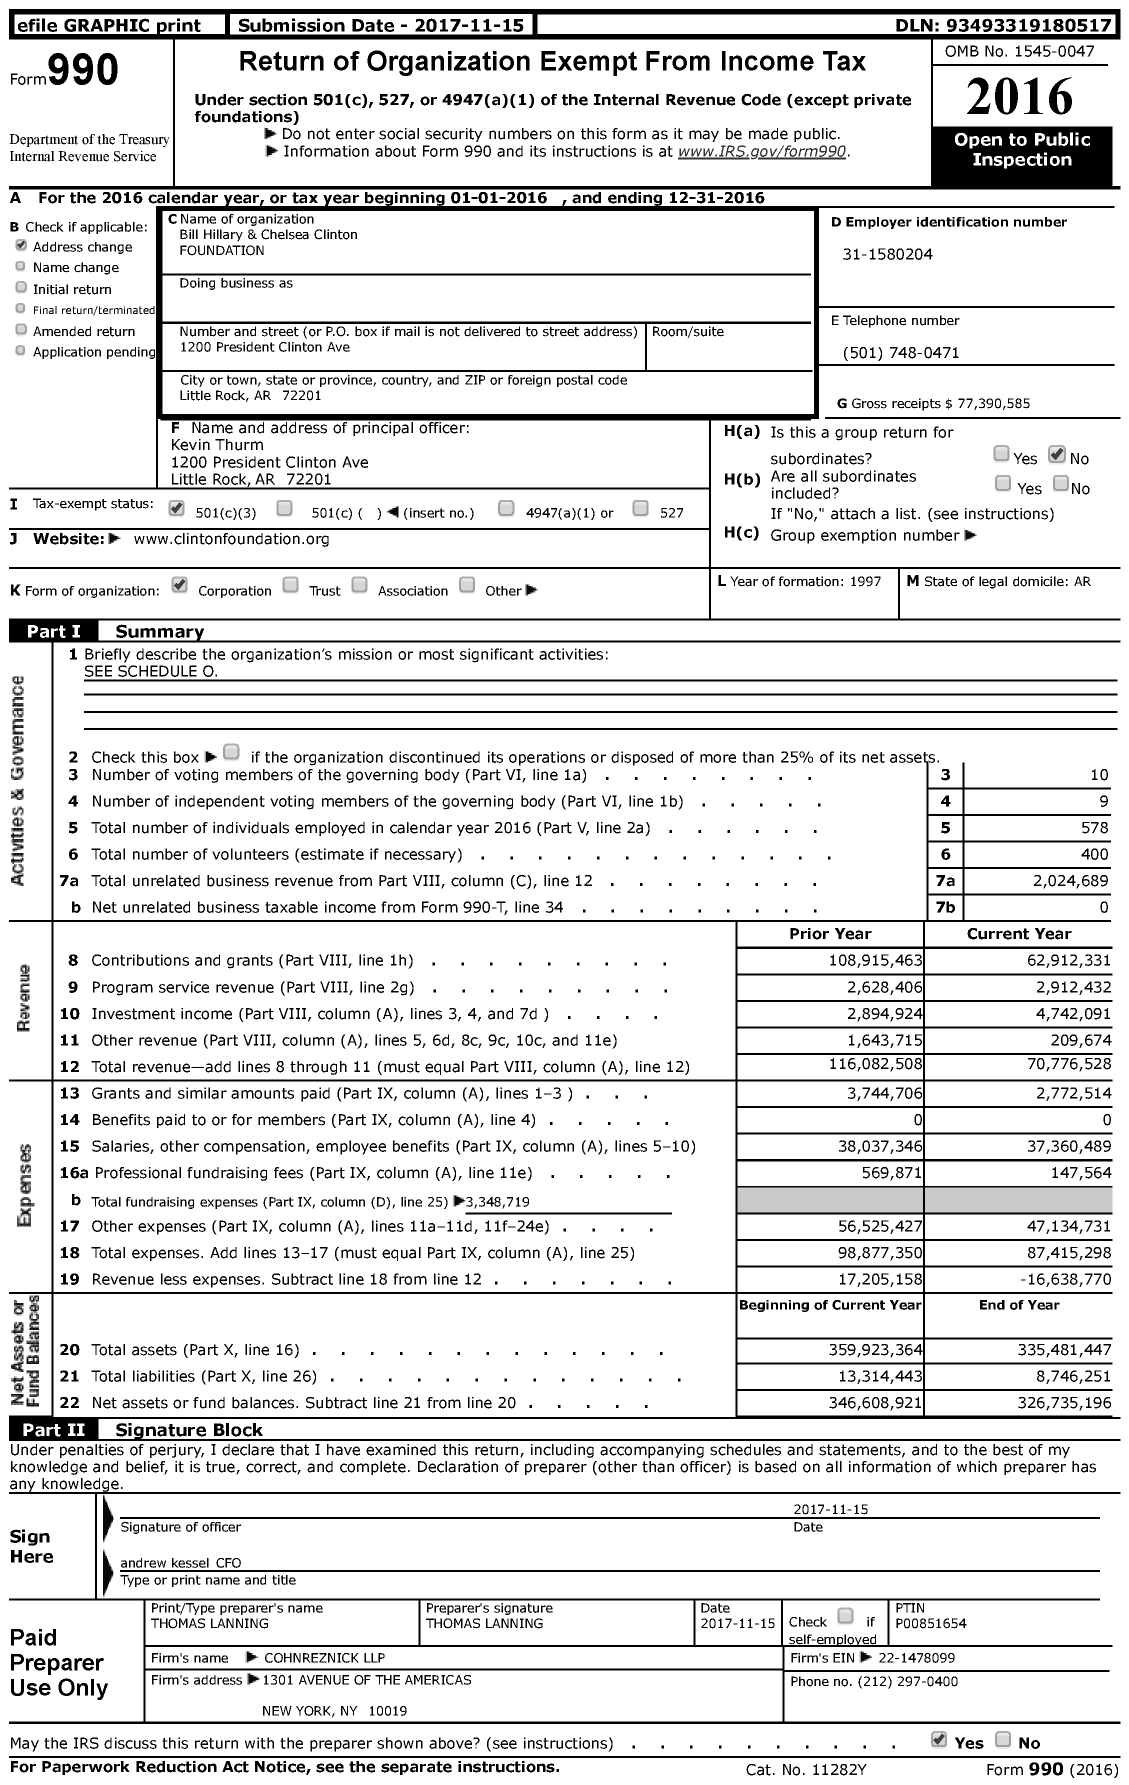 Image of first page of 2016 Form 990 for Bill Hillary and Chelsea Clinton FOUNDATION